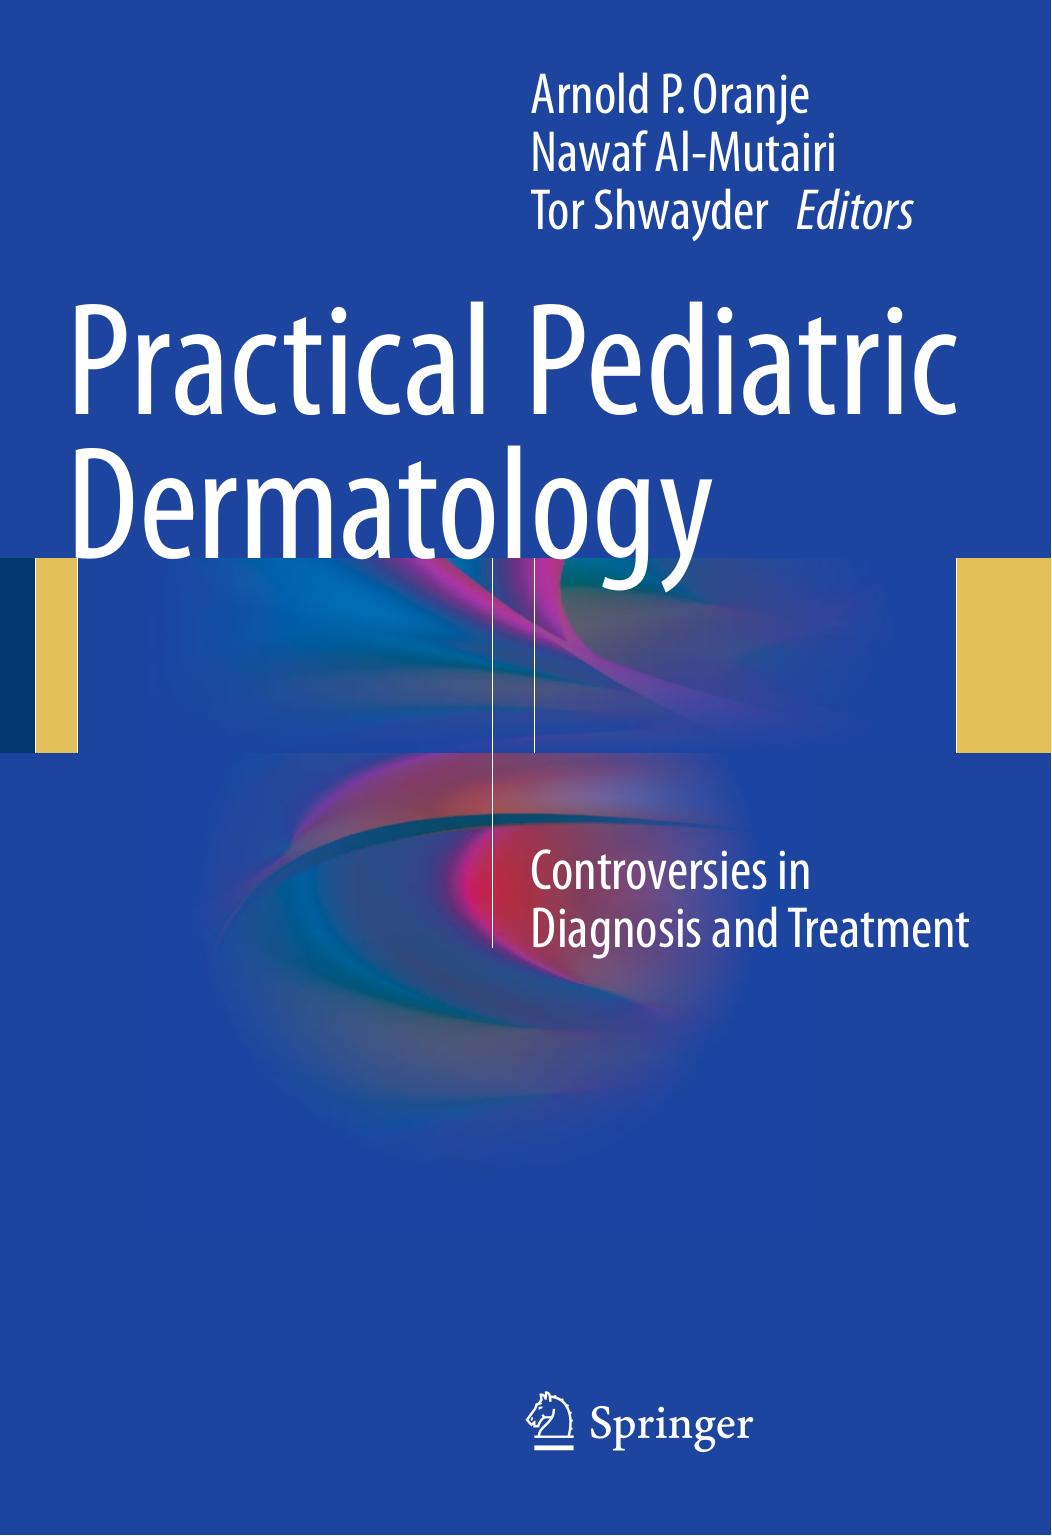 Practical Pediatric Dermatology  Controversies in Diagnosis and Treatment 2016